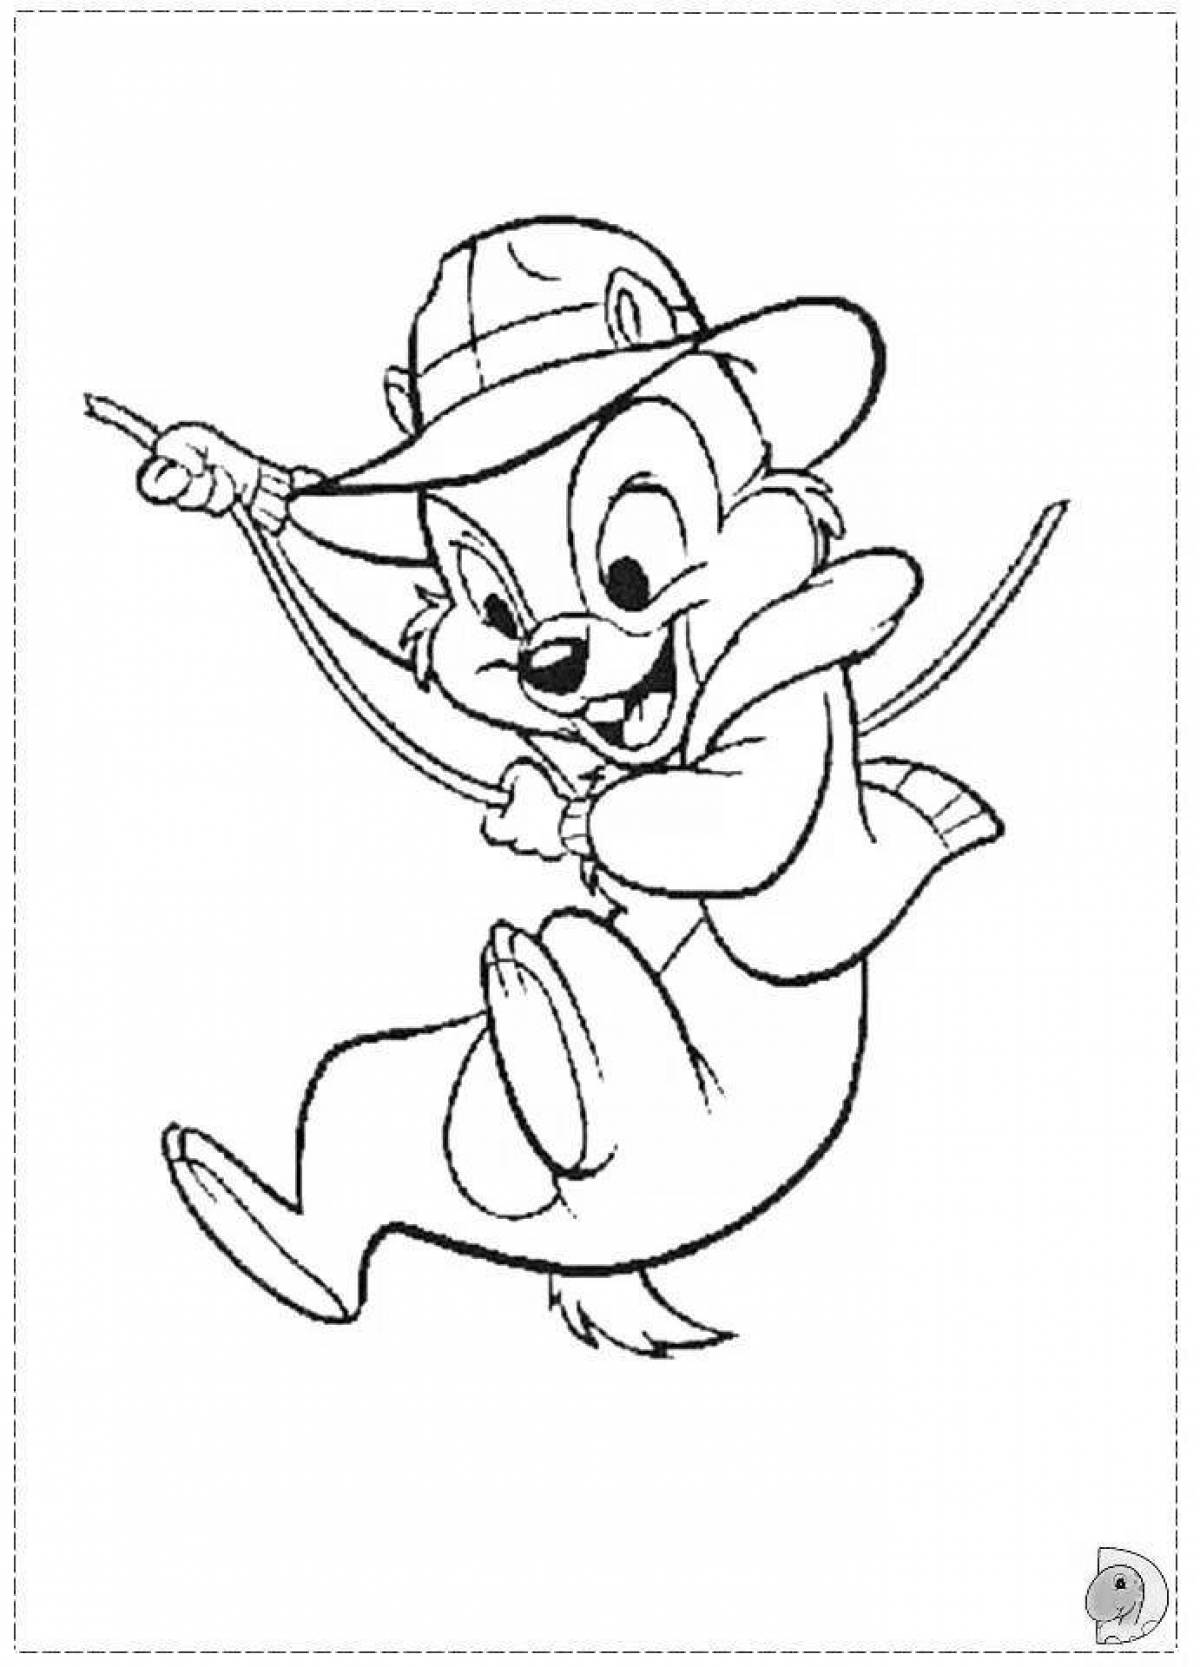 Chip and dale comic coloring